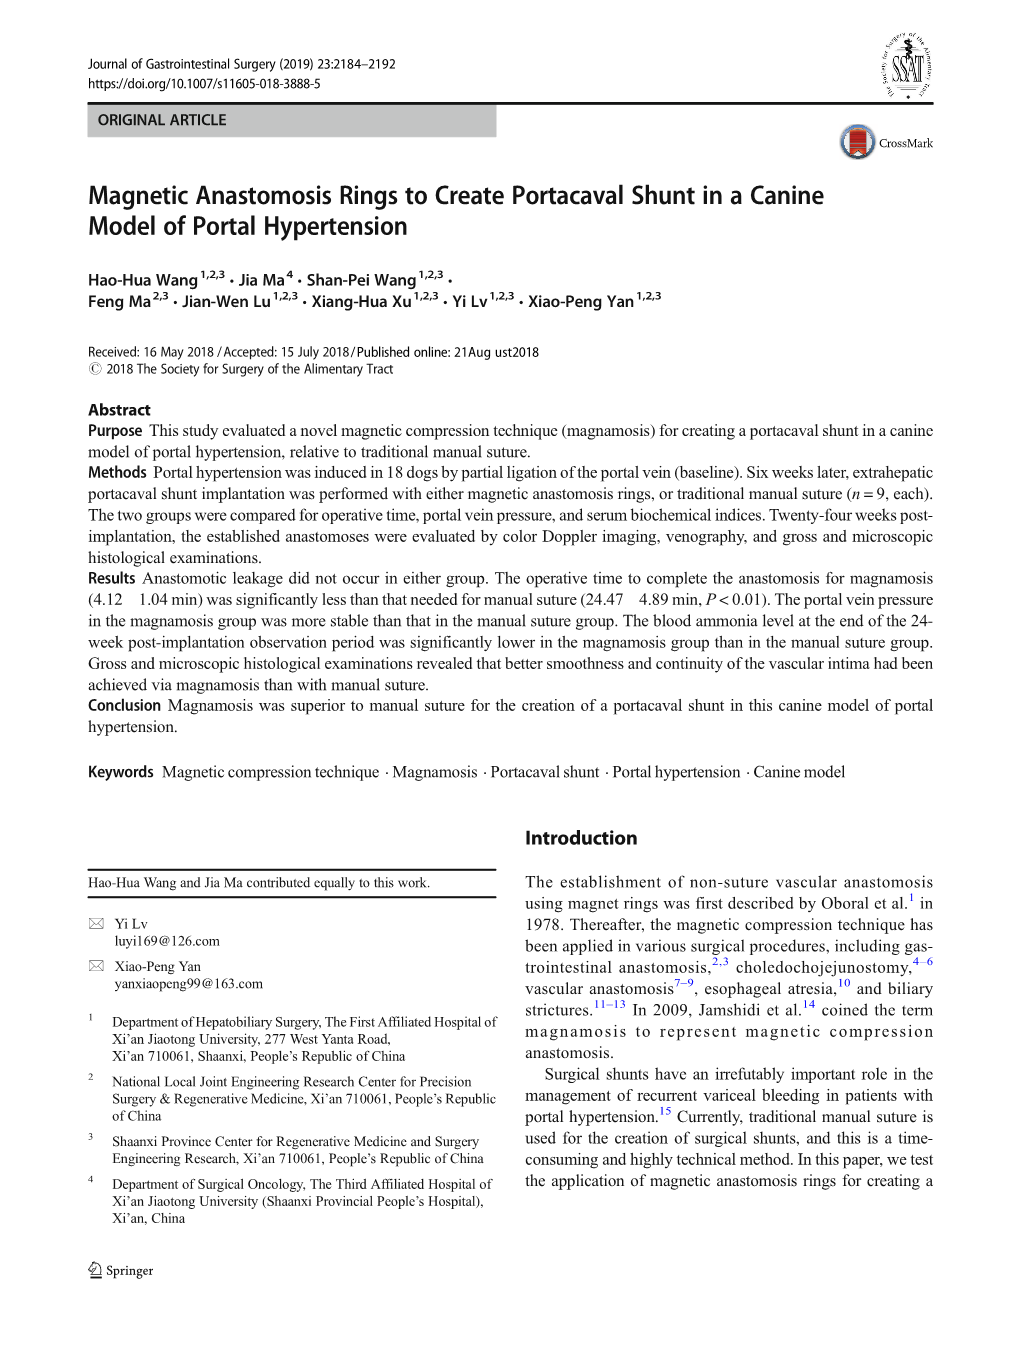 Magnetic Anastomosis Rings to Create Portacaval Shunt in a Canine Model of Portal Hypertension